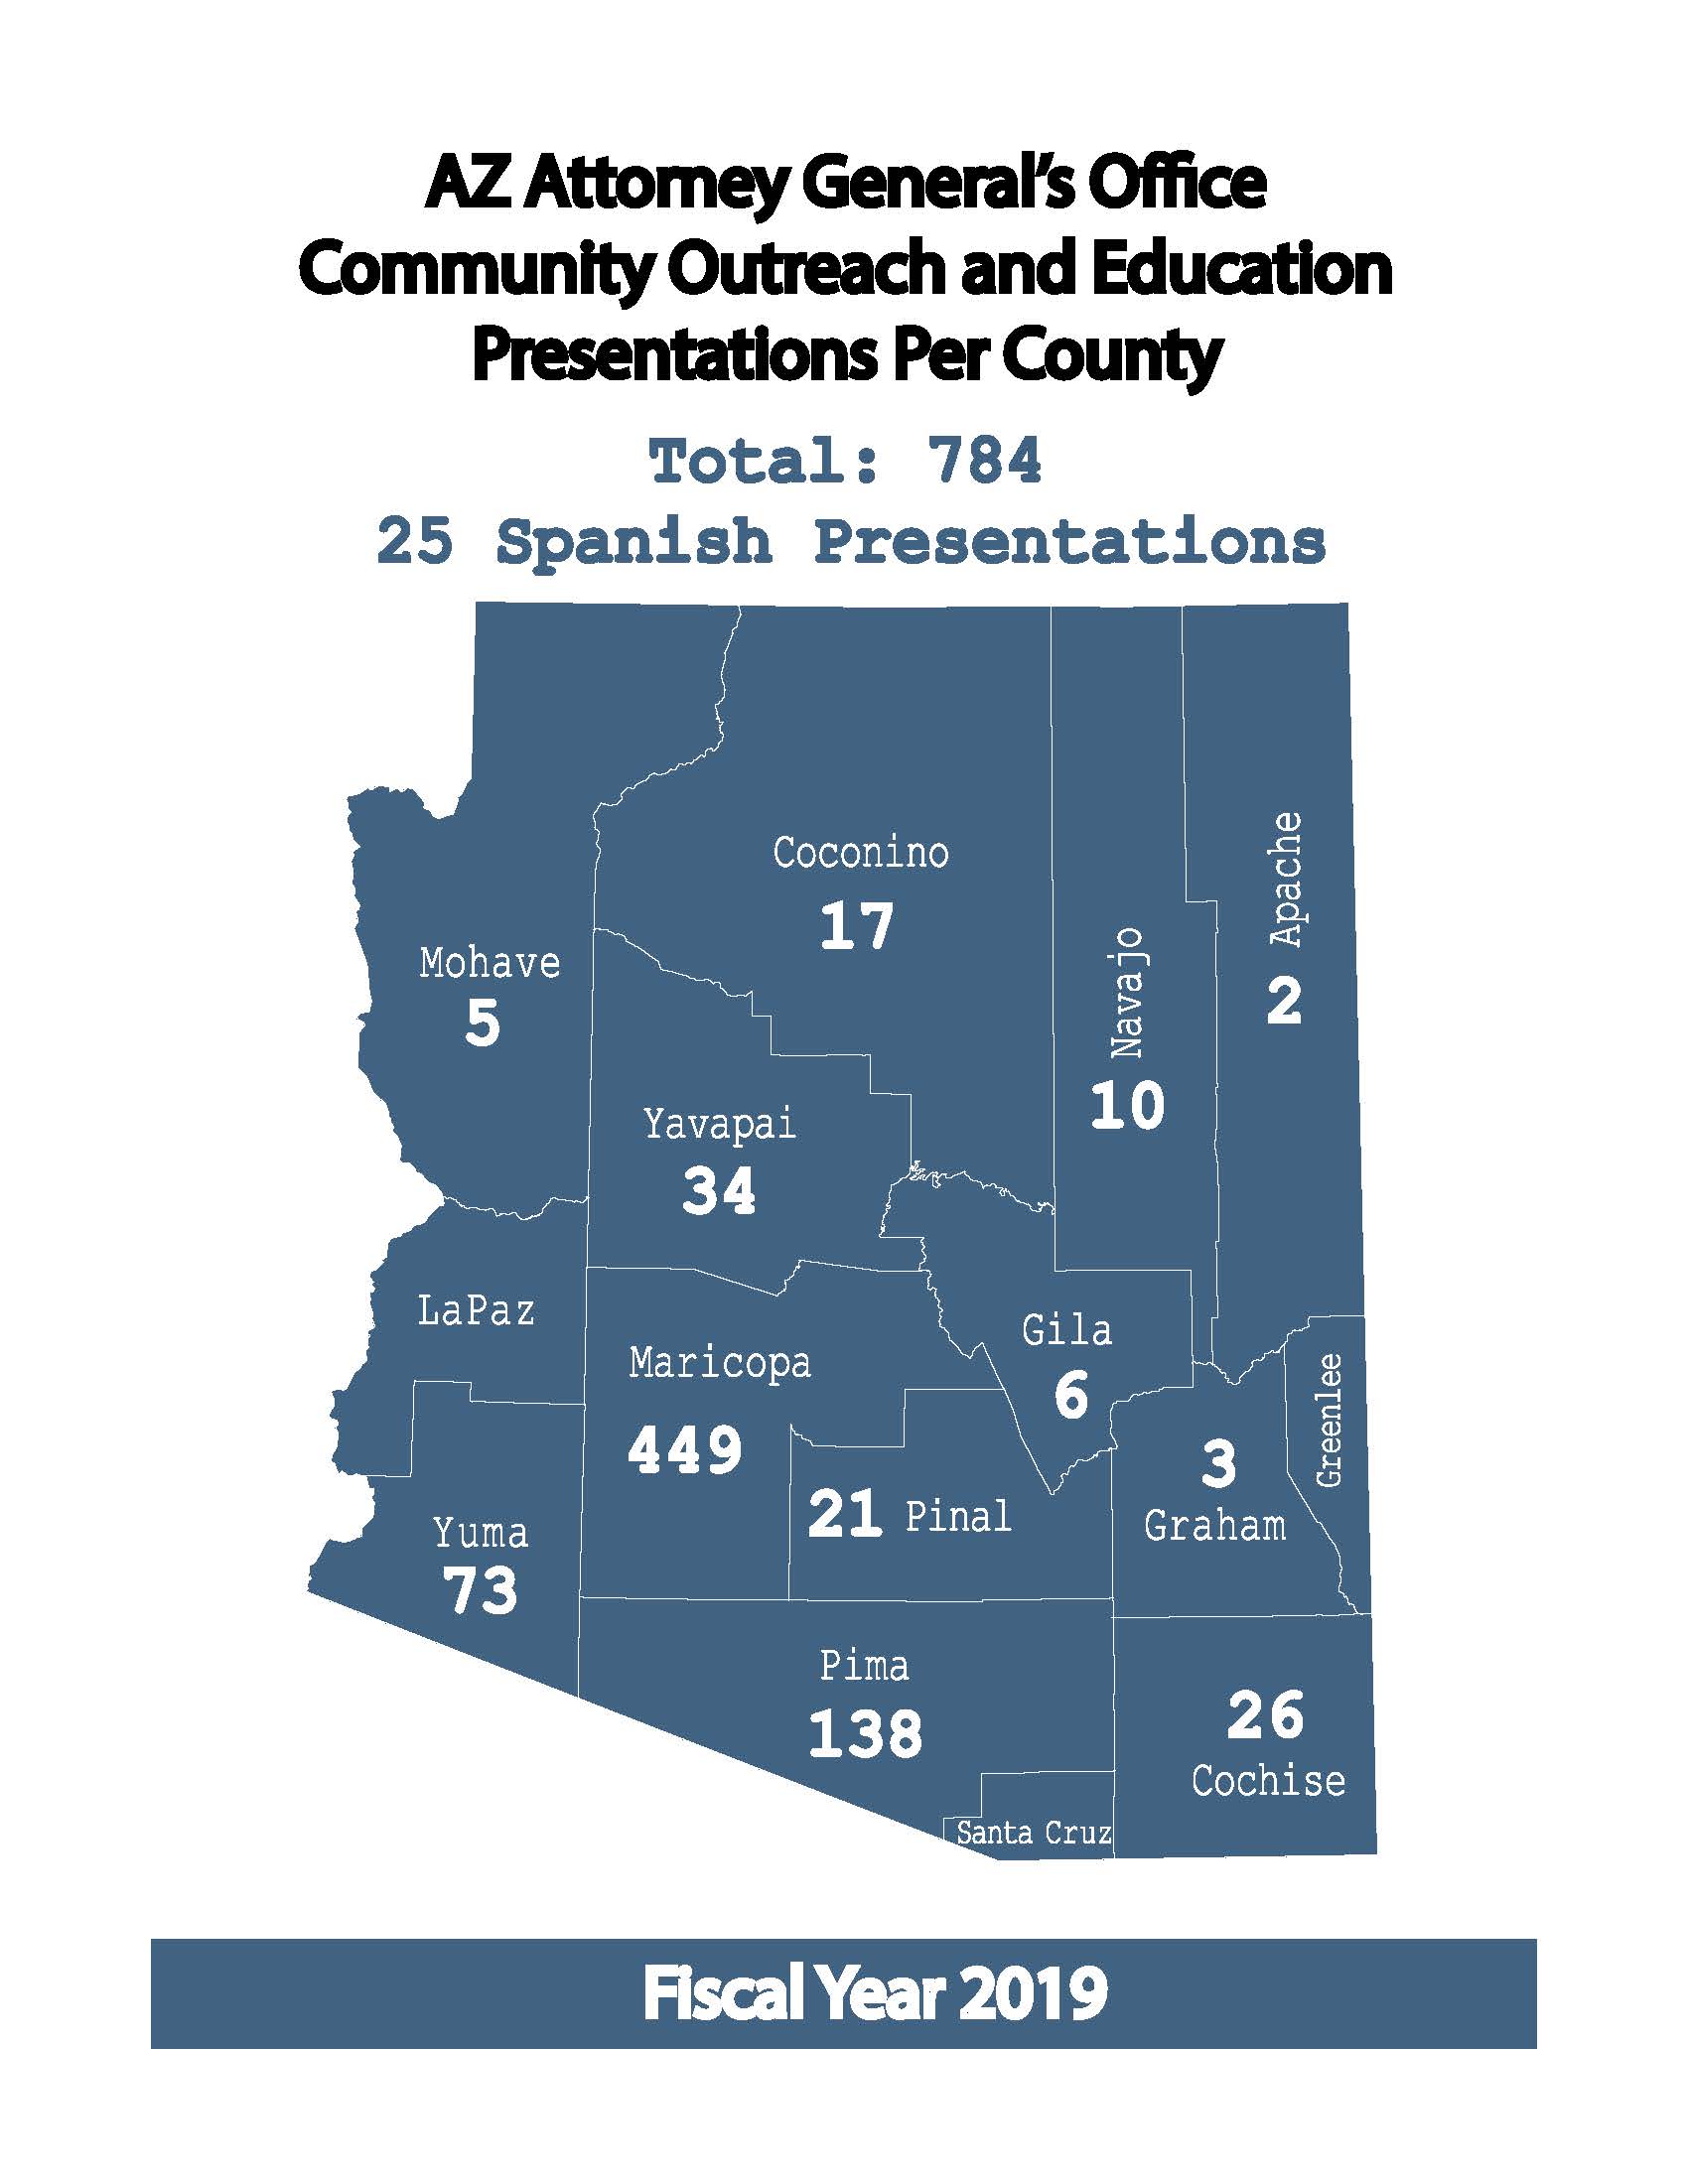 Map of Arizona showing how many presentations there were per county.